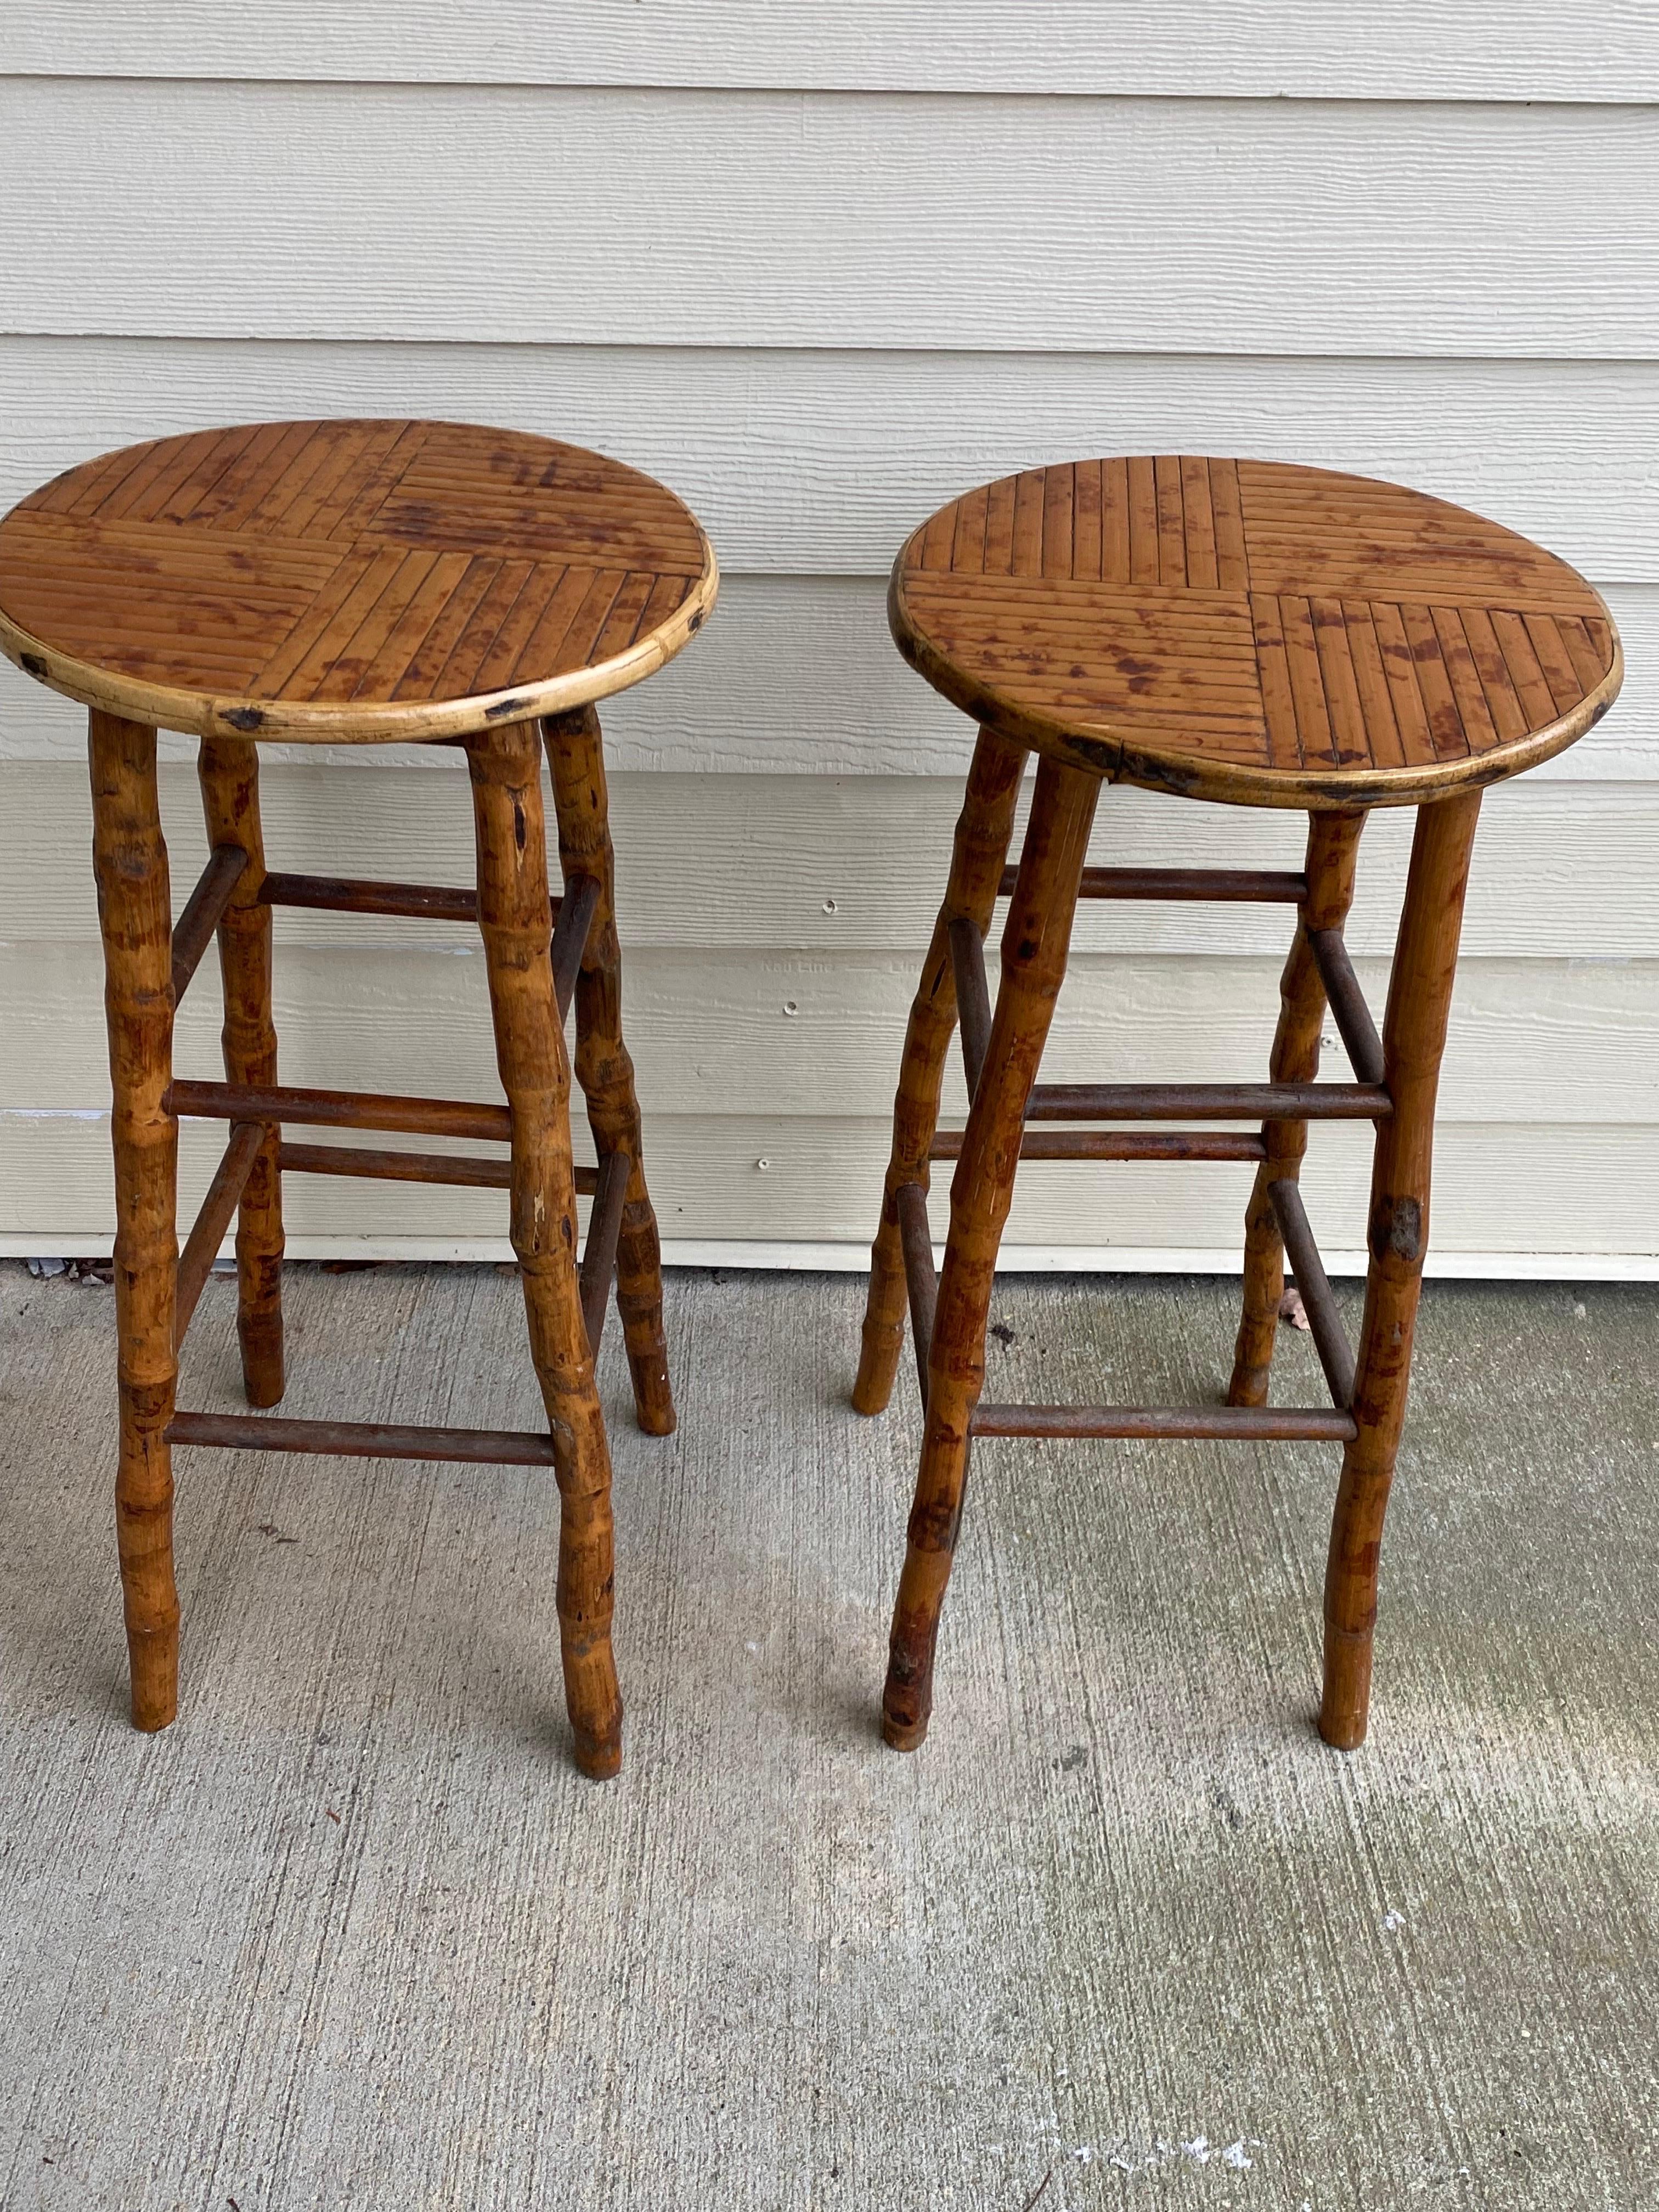 Mid-century Bamboo Bar Stools In Good Condition For Sale In Southampton, NY